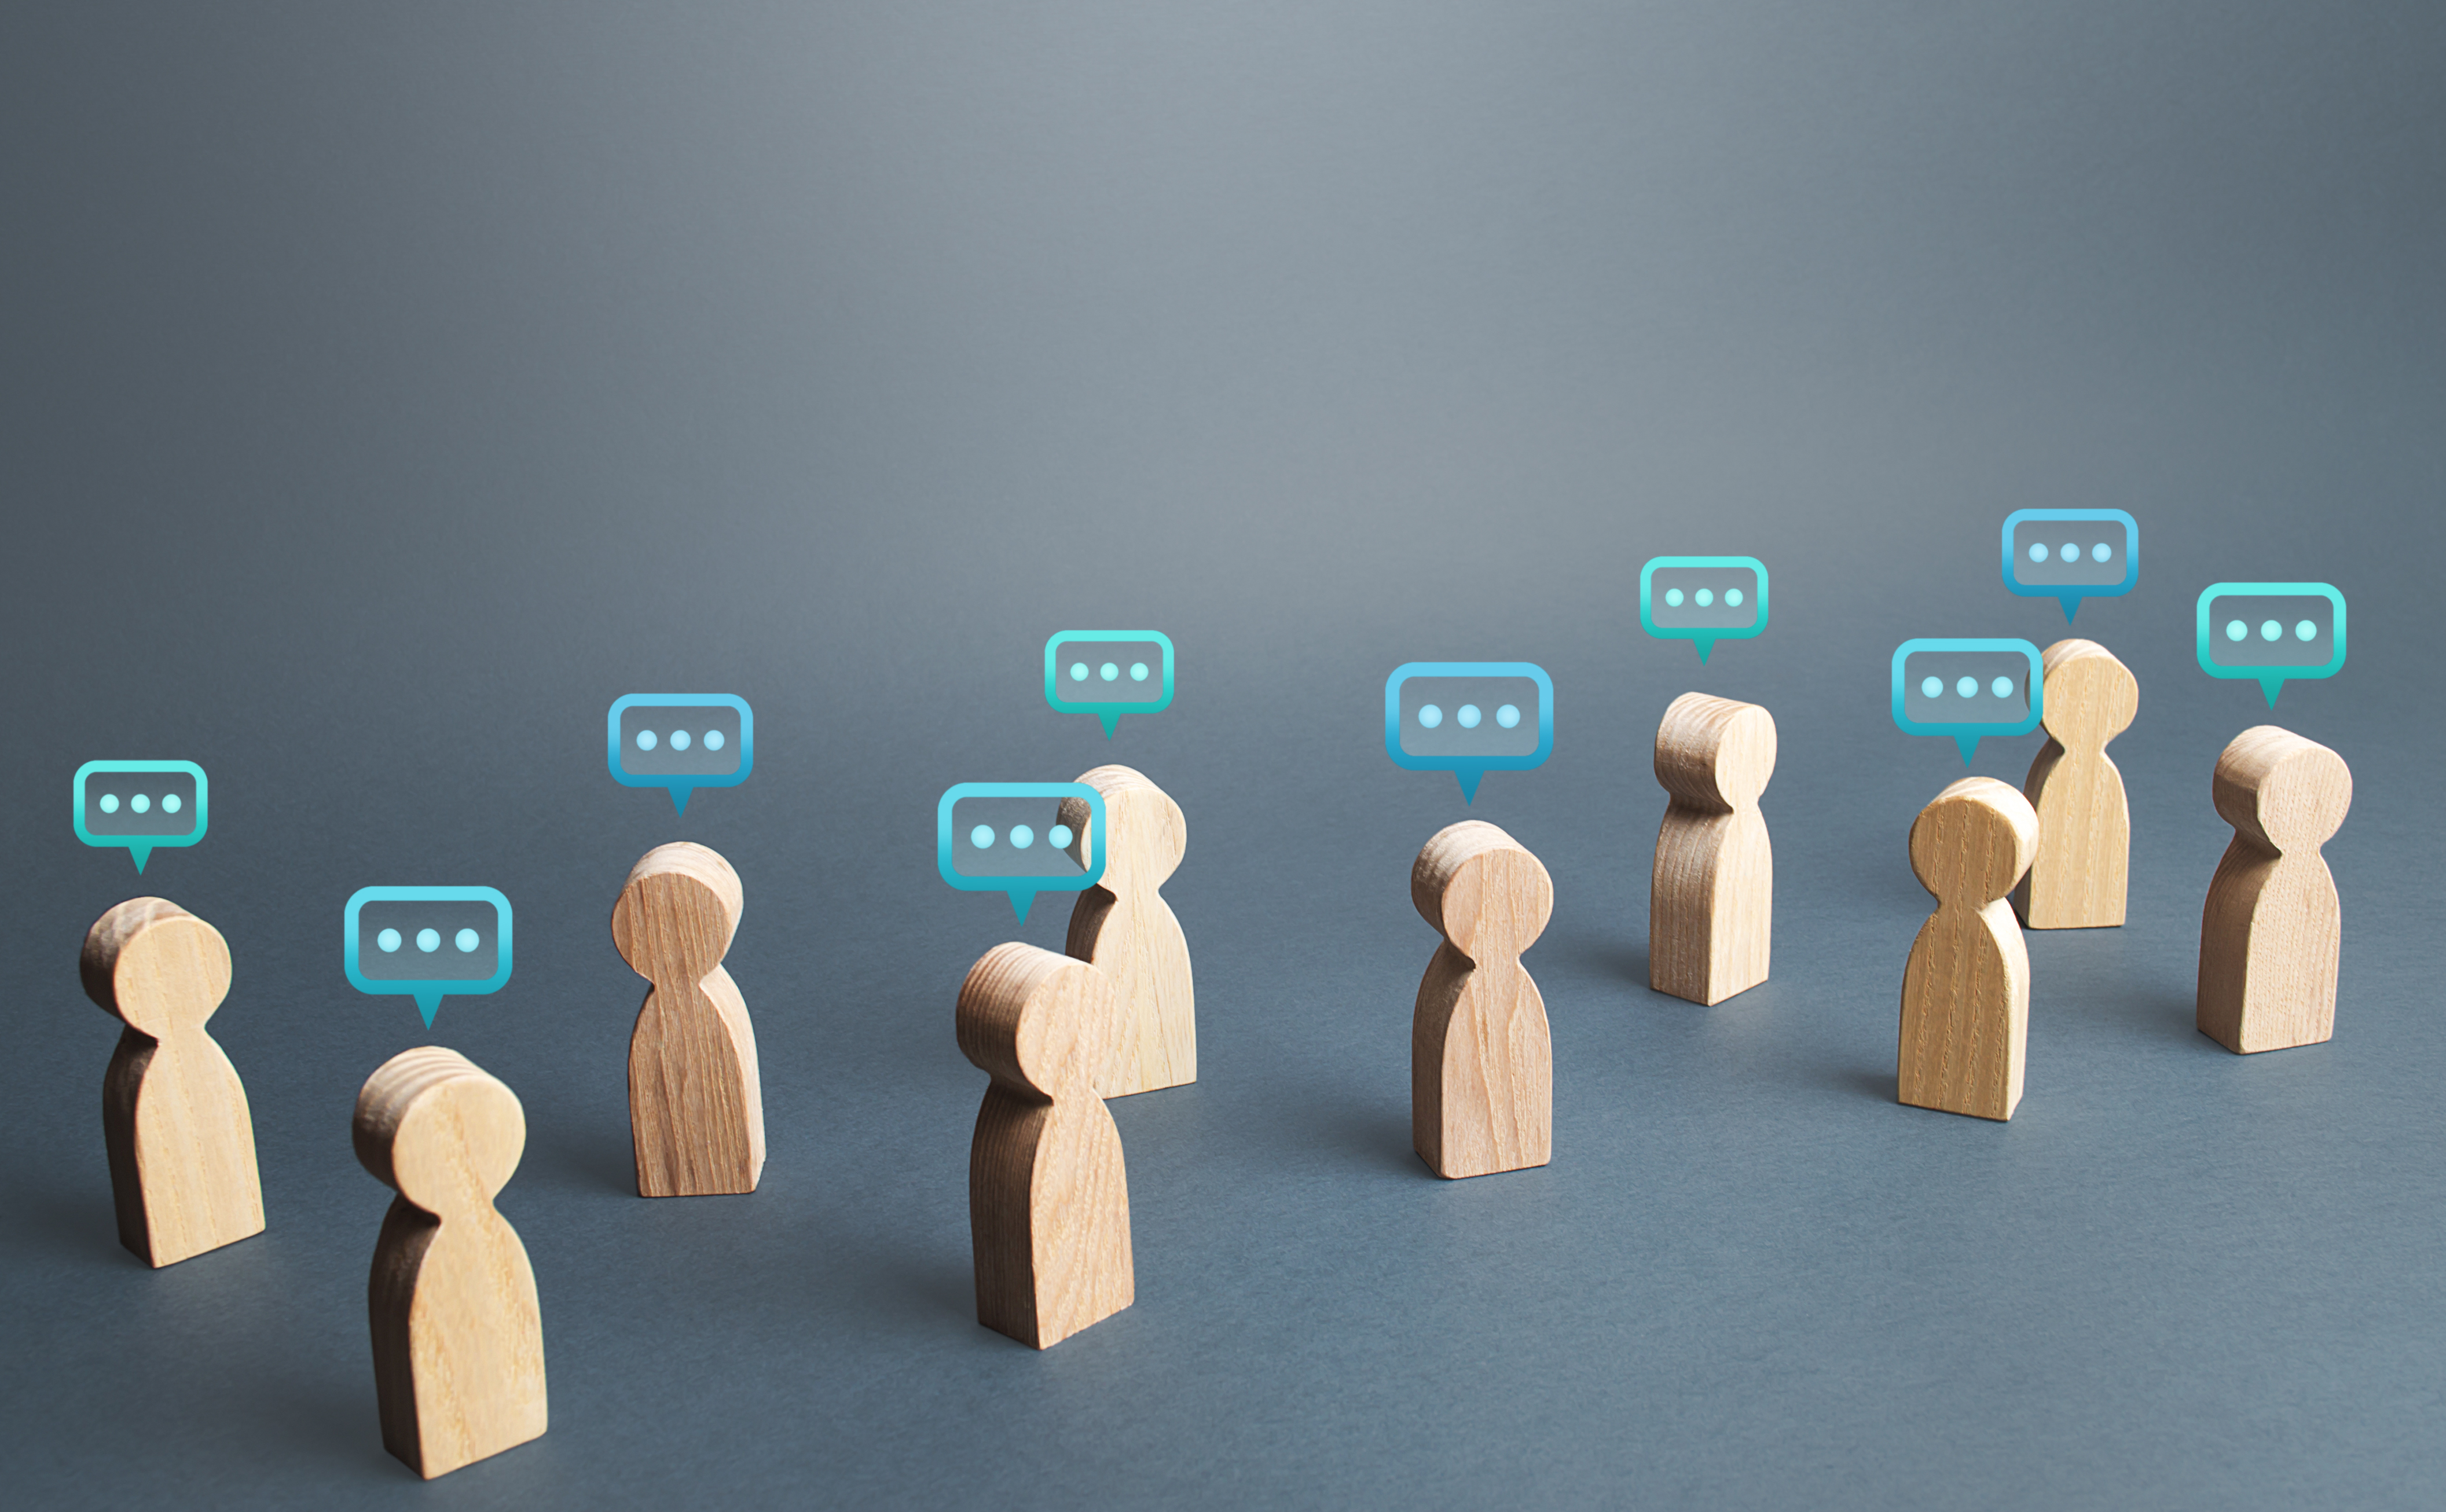 Wooden blocks representing people each with a speech bubble